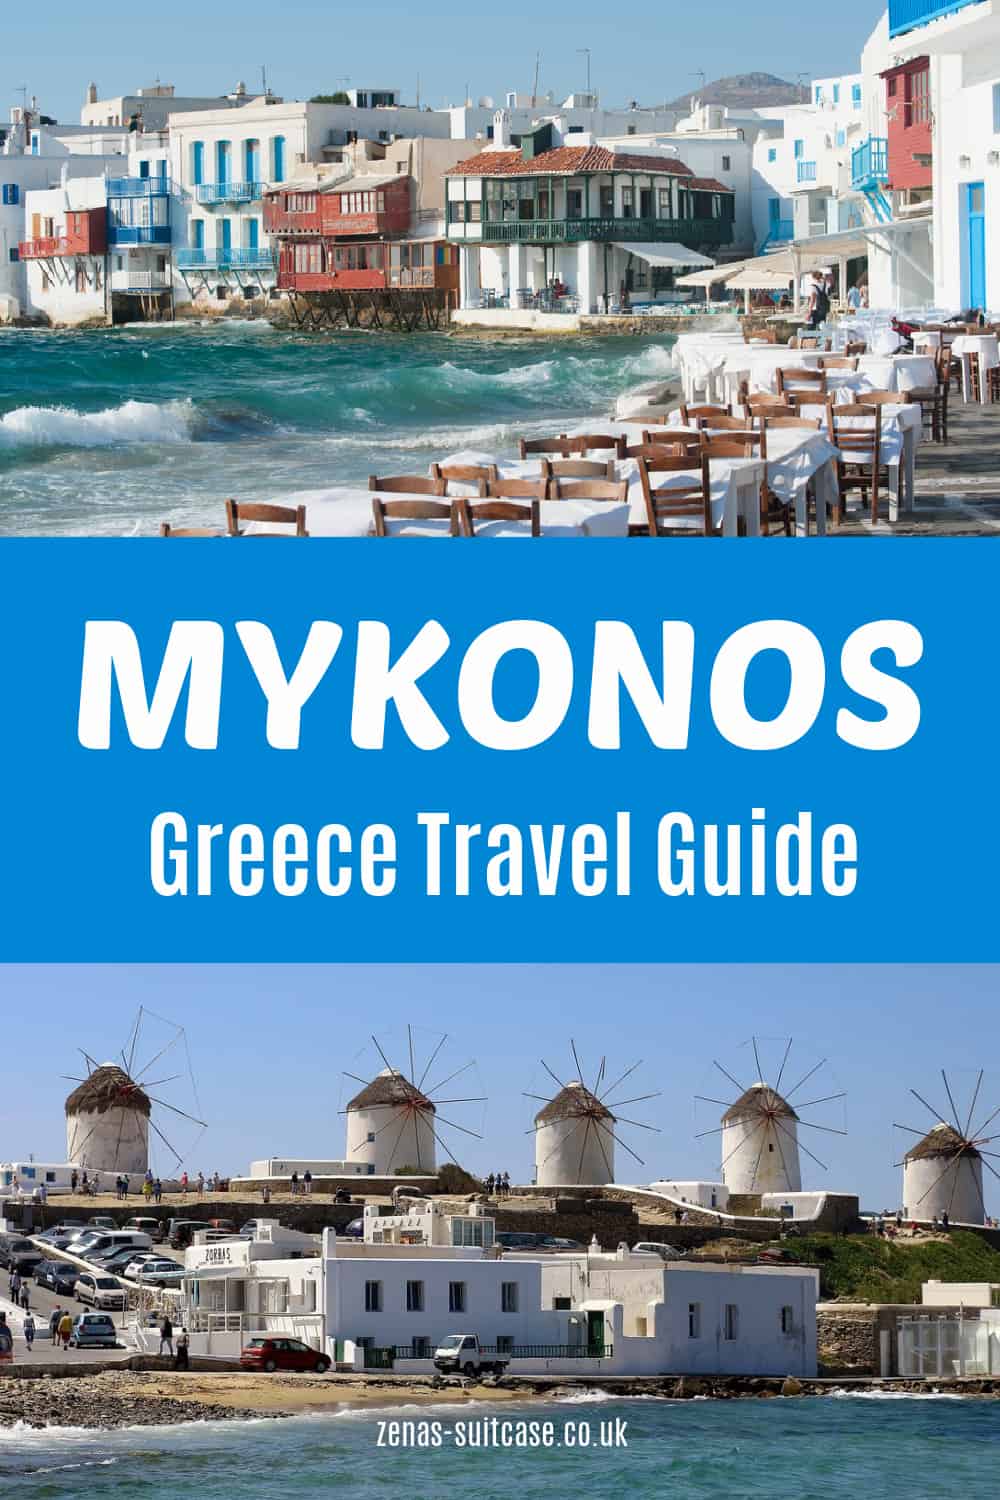 Planning a trip to Mykonos_ This travel guide is packed with hints and tips to make the most of your trip